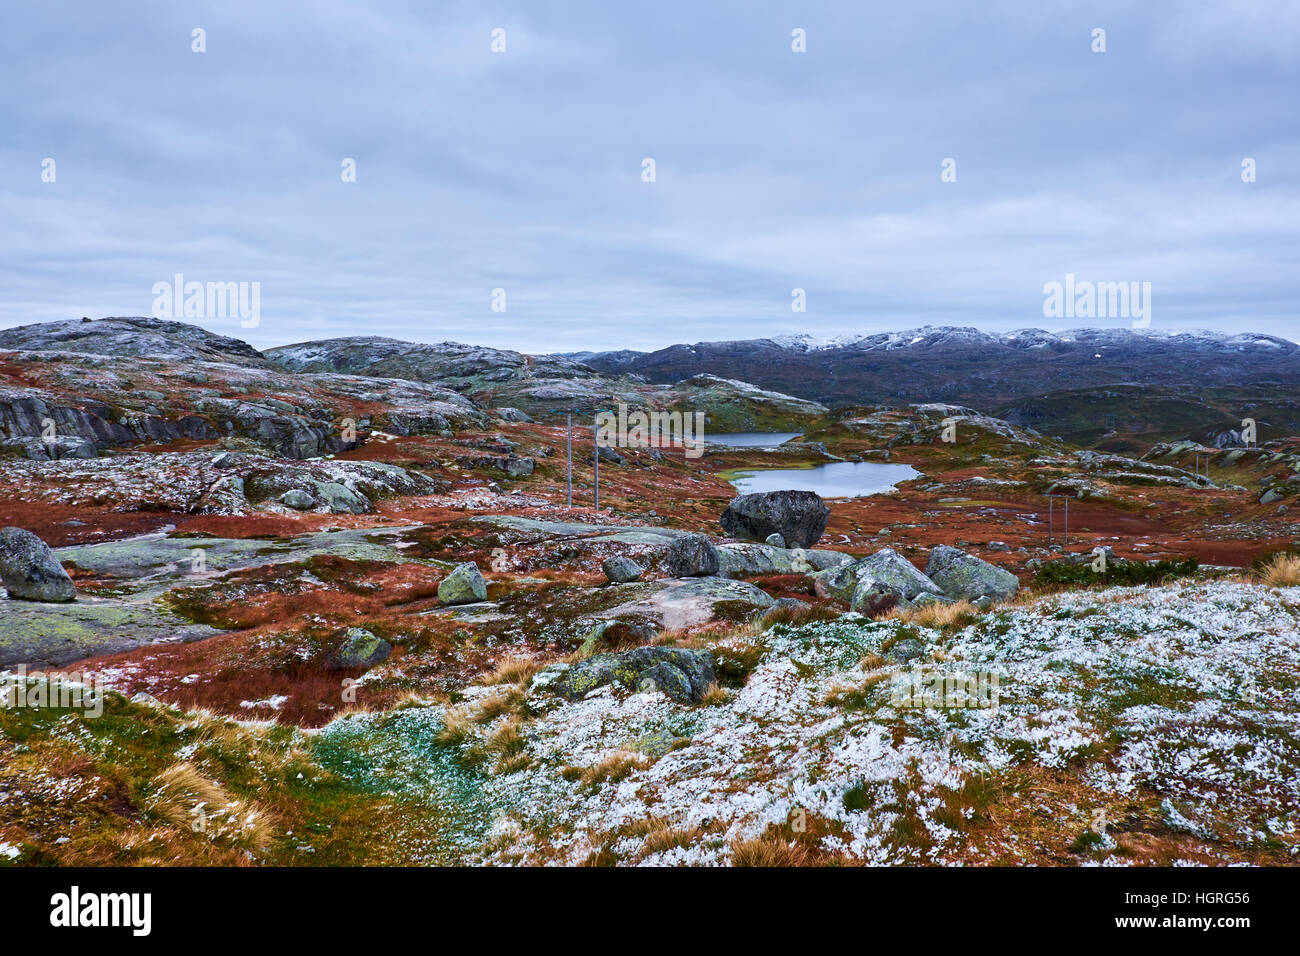 Norwegian mountain landscape with tarns, boulders and snow sprinkled over the rough ground vegetation Stock Photo